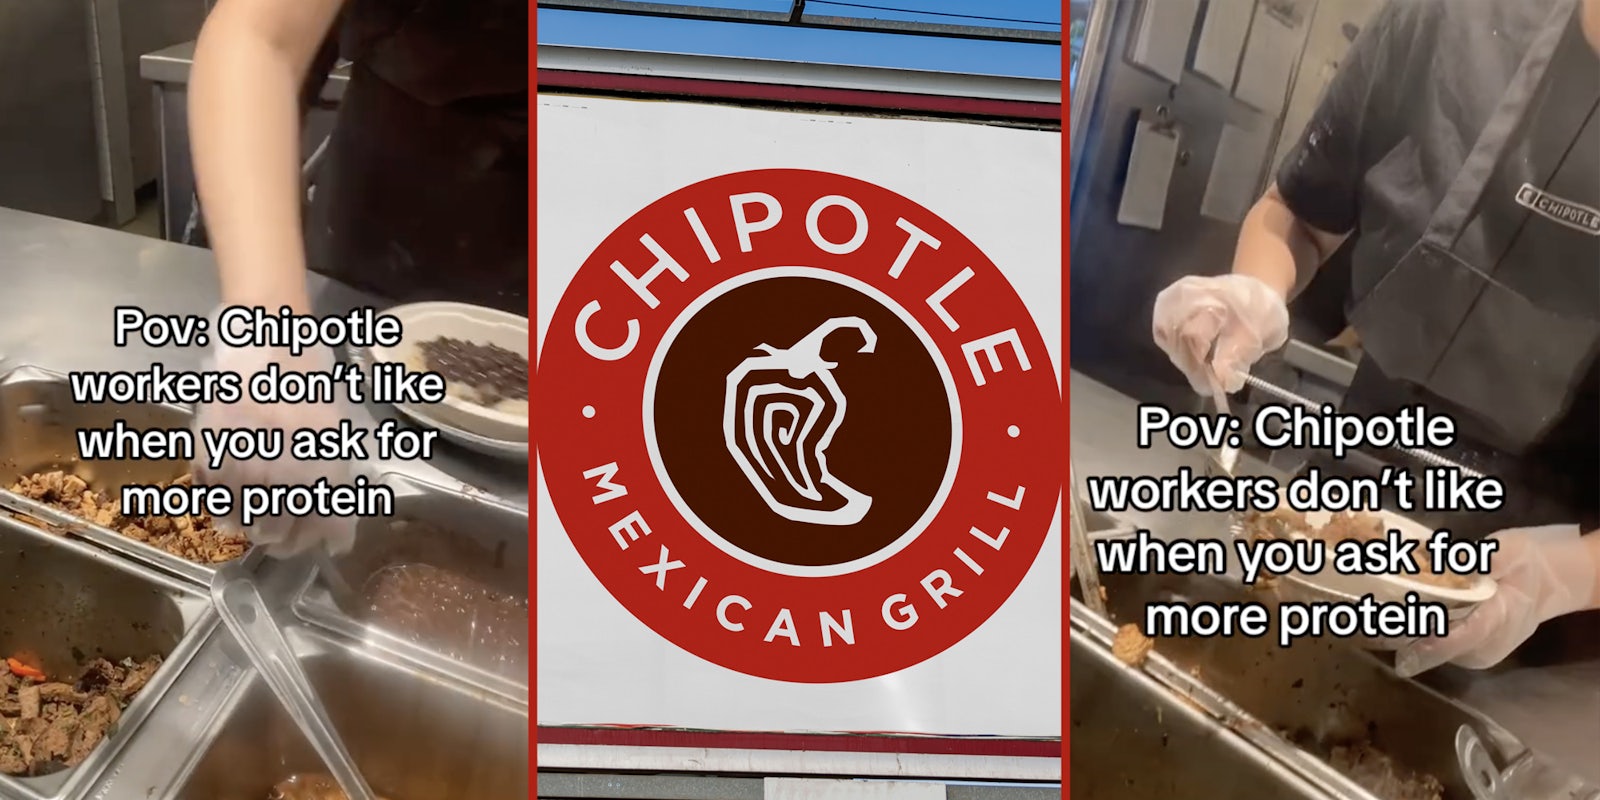 Chipotle worker scooping meat(l+r), Chipotle sign(c)